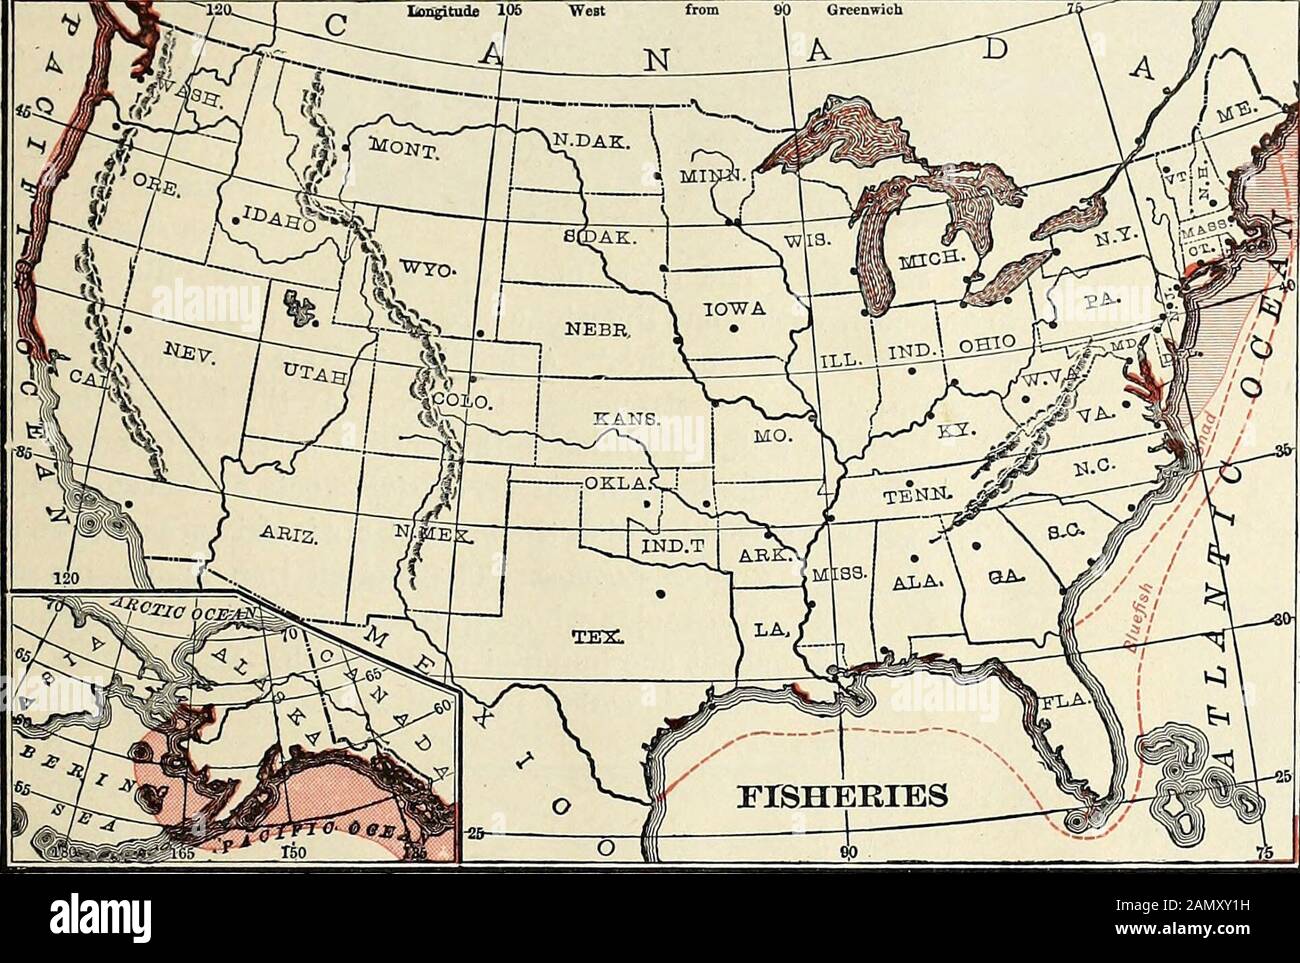 Advanced Geography . along theThe second beginsMichigan key to colors: Oysters I I Cod, Clams, Lobsters,.Mackerel Haddock EZ3I .Salmon CZ3 Sponges EZZZt sey to the banks of Newfoundland; clams, Chesapeake bay toMaine ; shad, Florida to Maine ; lobsters, Delaware bay to NewBrunswick ; mackerel, cape Hatteras to gulf ofSt. Lawrence; haddock, same as cod; bluefish,Cape Cod to Mexico; alewives, Georgia to gulf ofSt. Lawrence; squeteague, Cape Cod to Mexico;crabs, Chesapeake bay to Long Island; sponges,Florida; menhaden, North Carolina to Maine;mullet, North Carolina to Mexico; herring, Mar-thas Vi Stock Photo